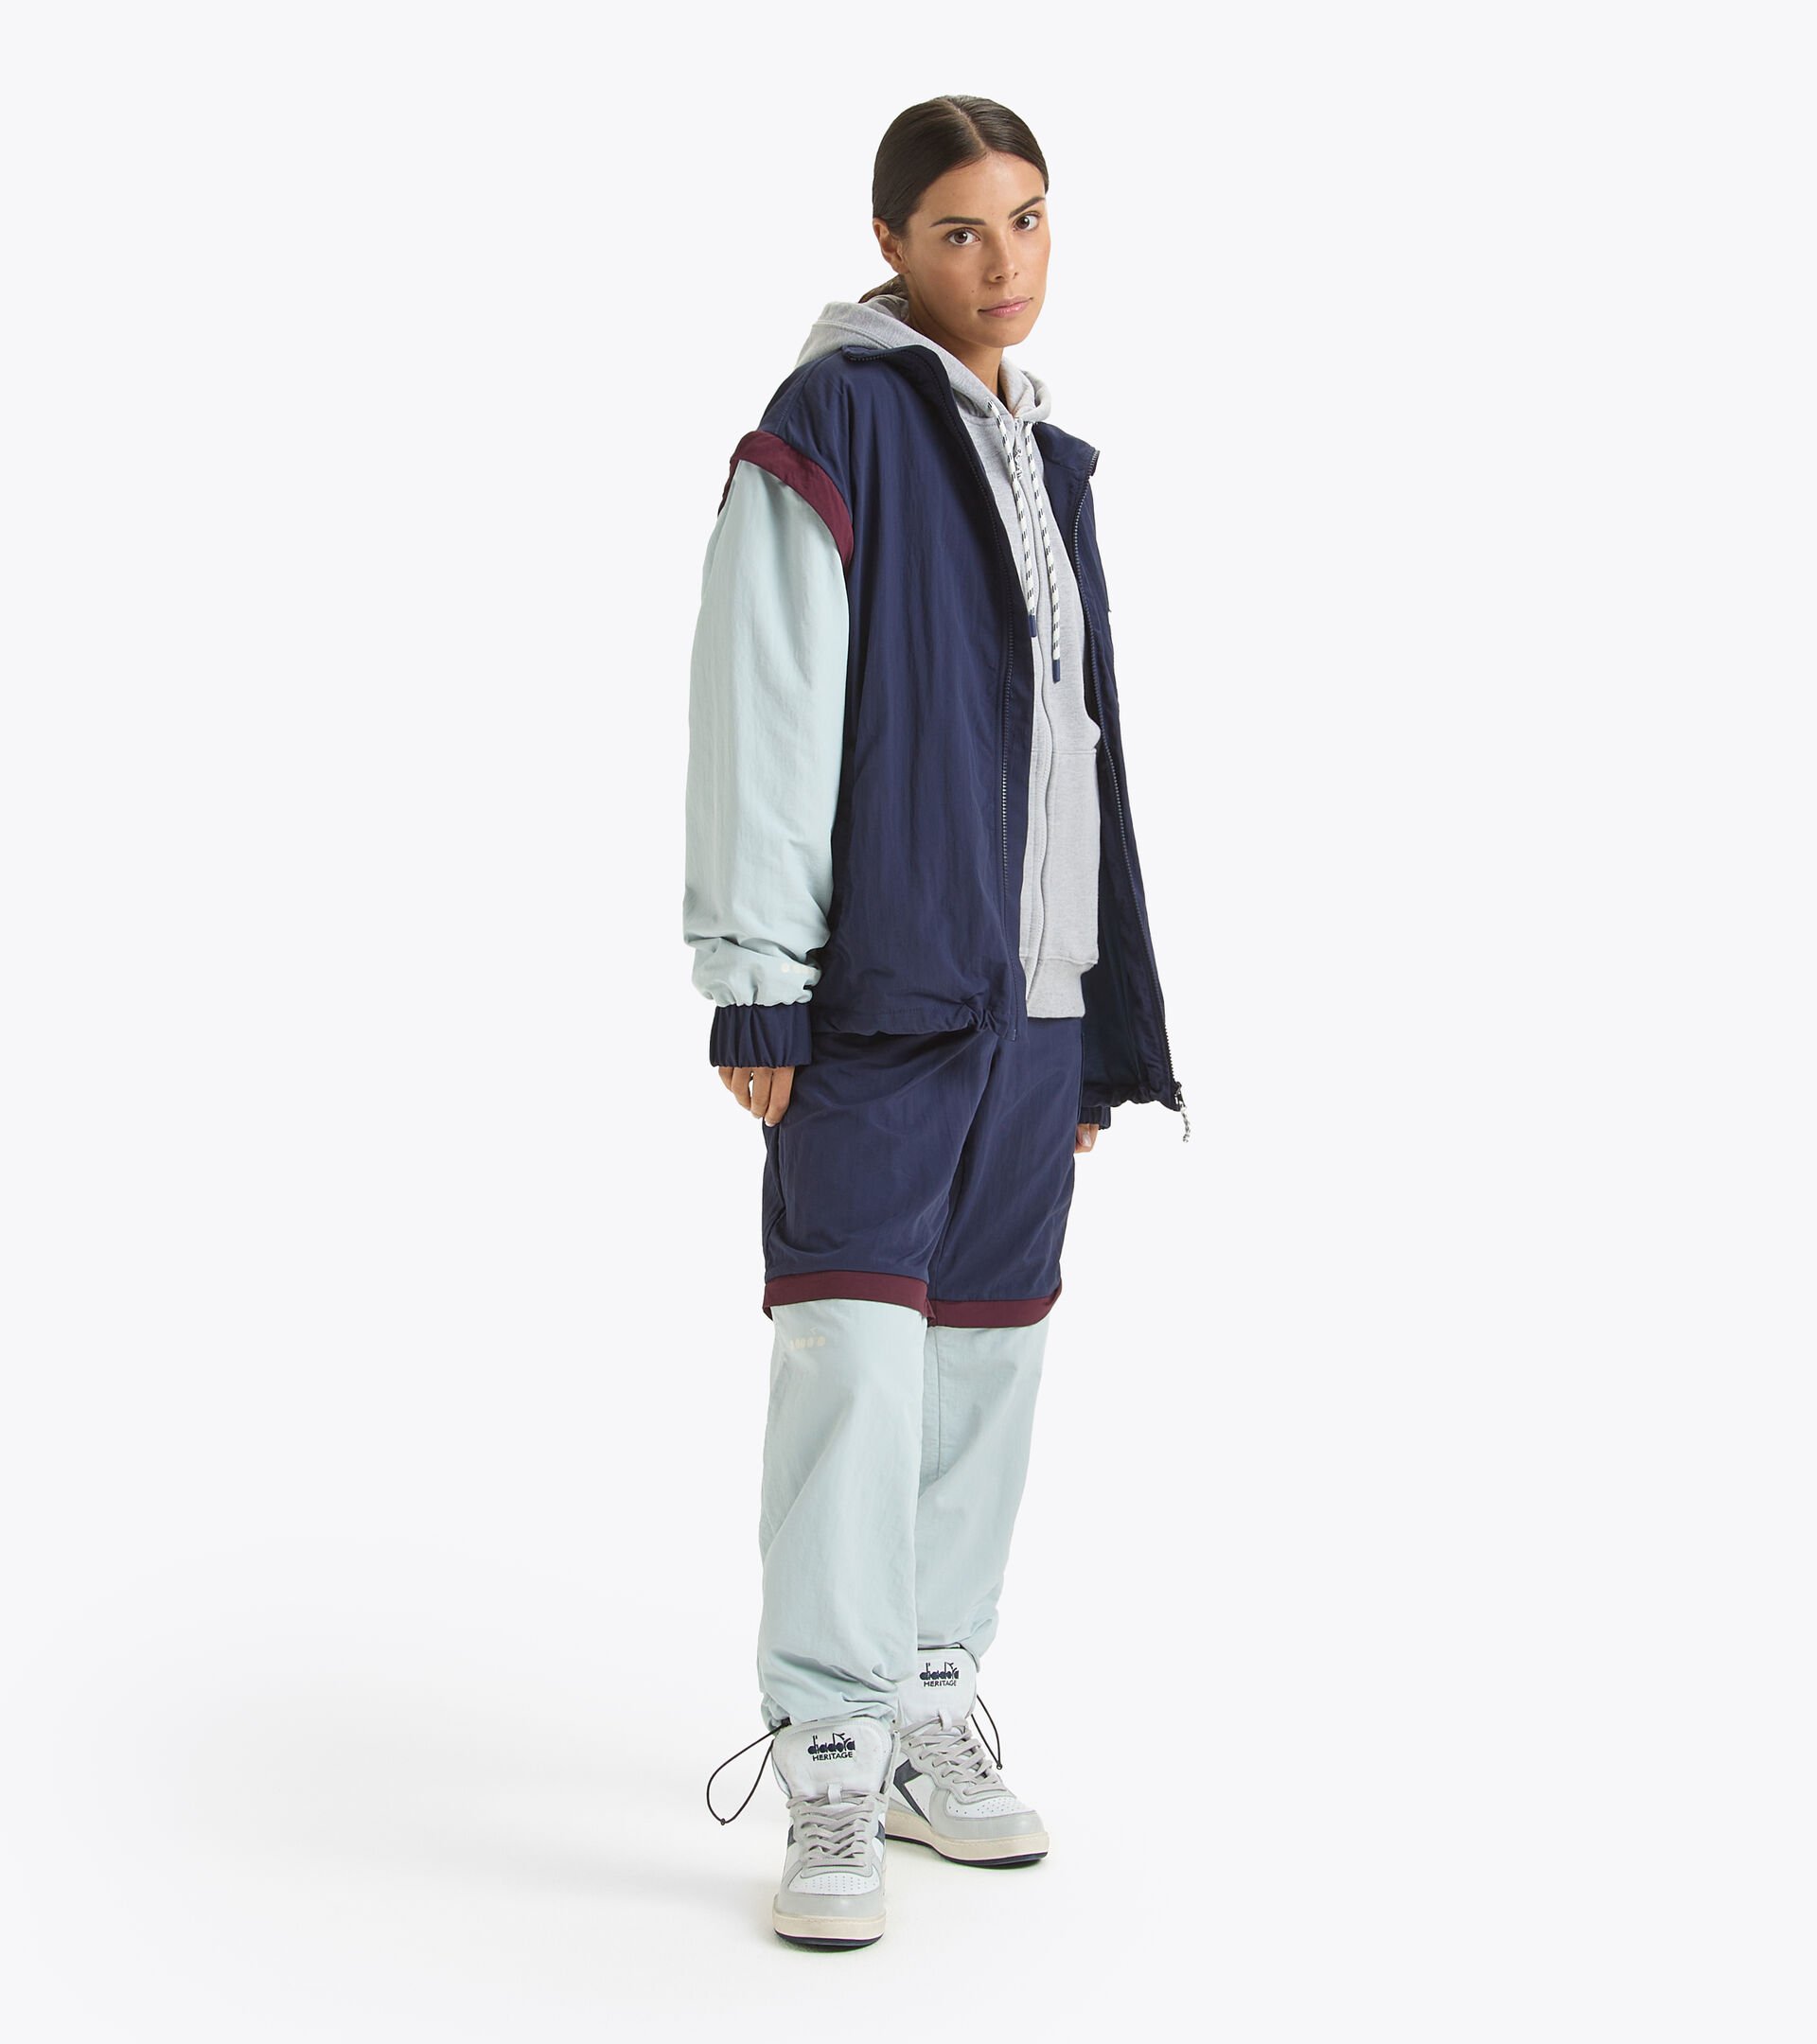 Track Pants - Made in italy - Gender Neutral TRACK PANT LEGACY OCEANA/HIGH RISE/MALAGA RED - Diadora